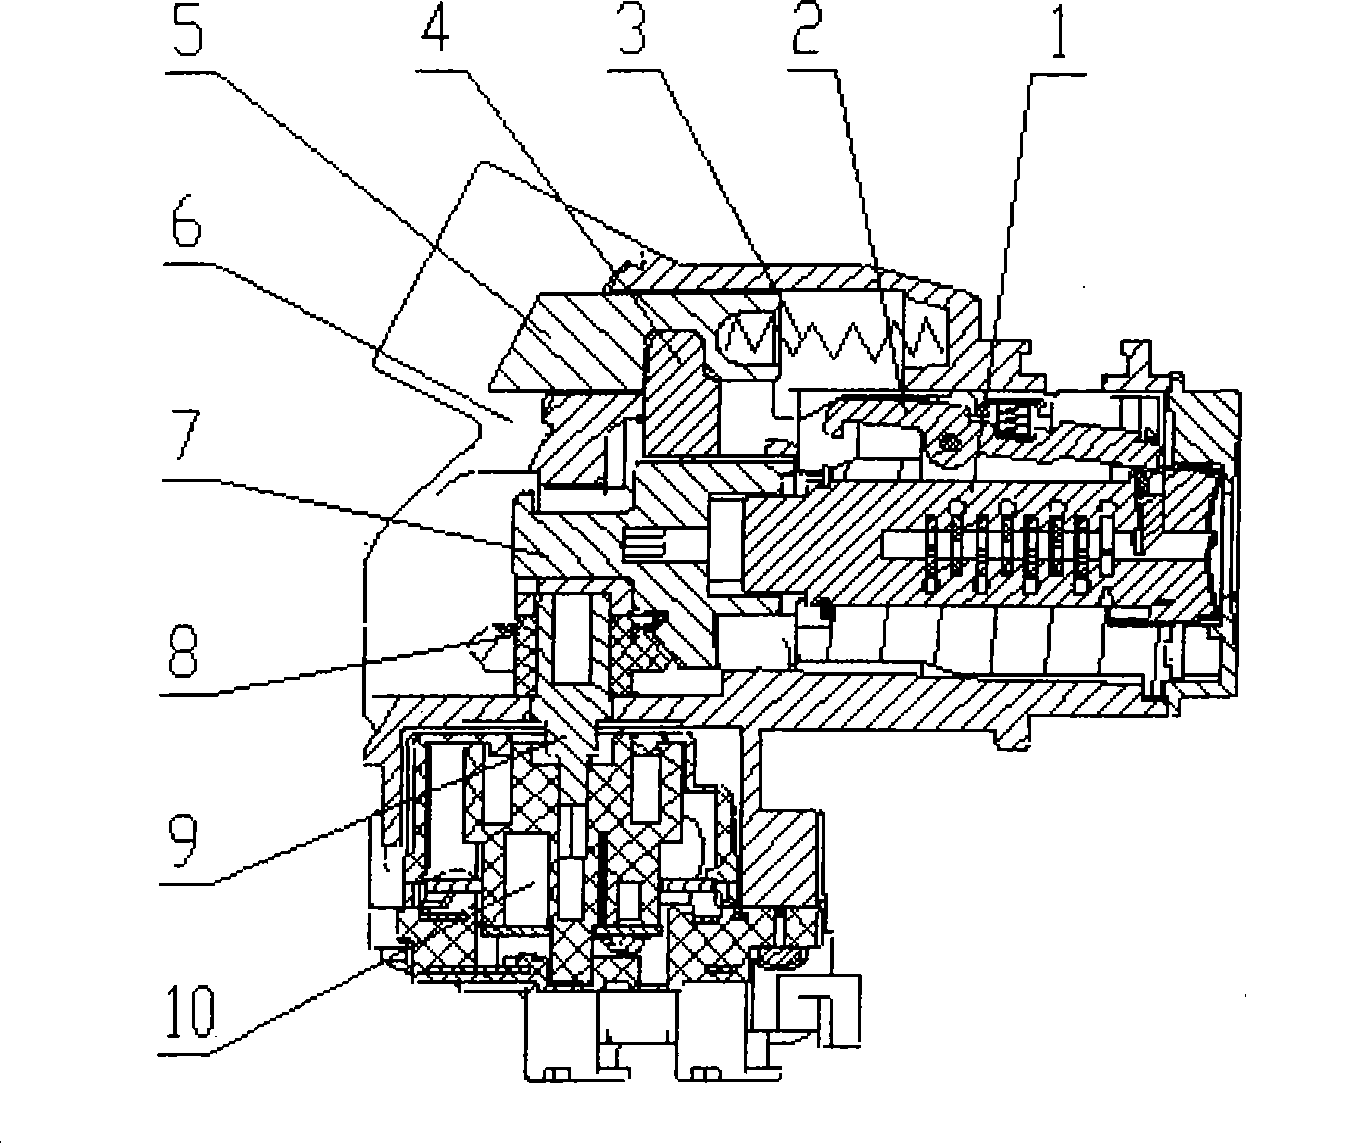 Ignition switch with gearing construction